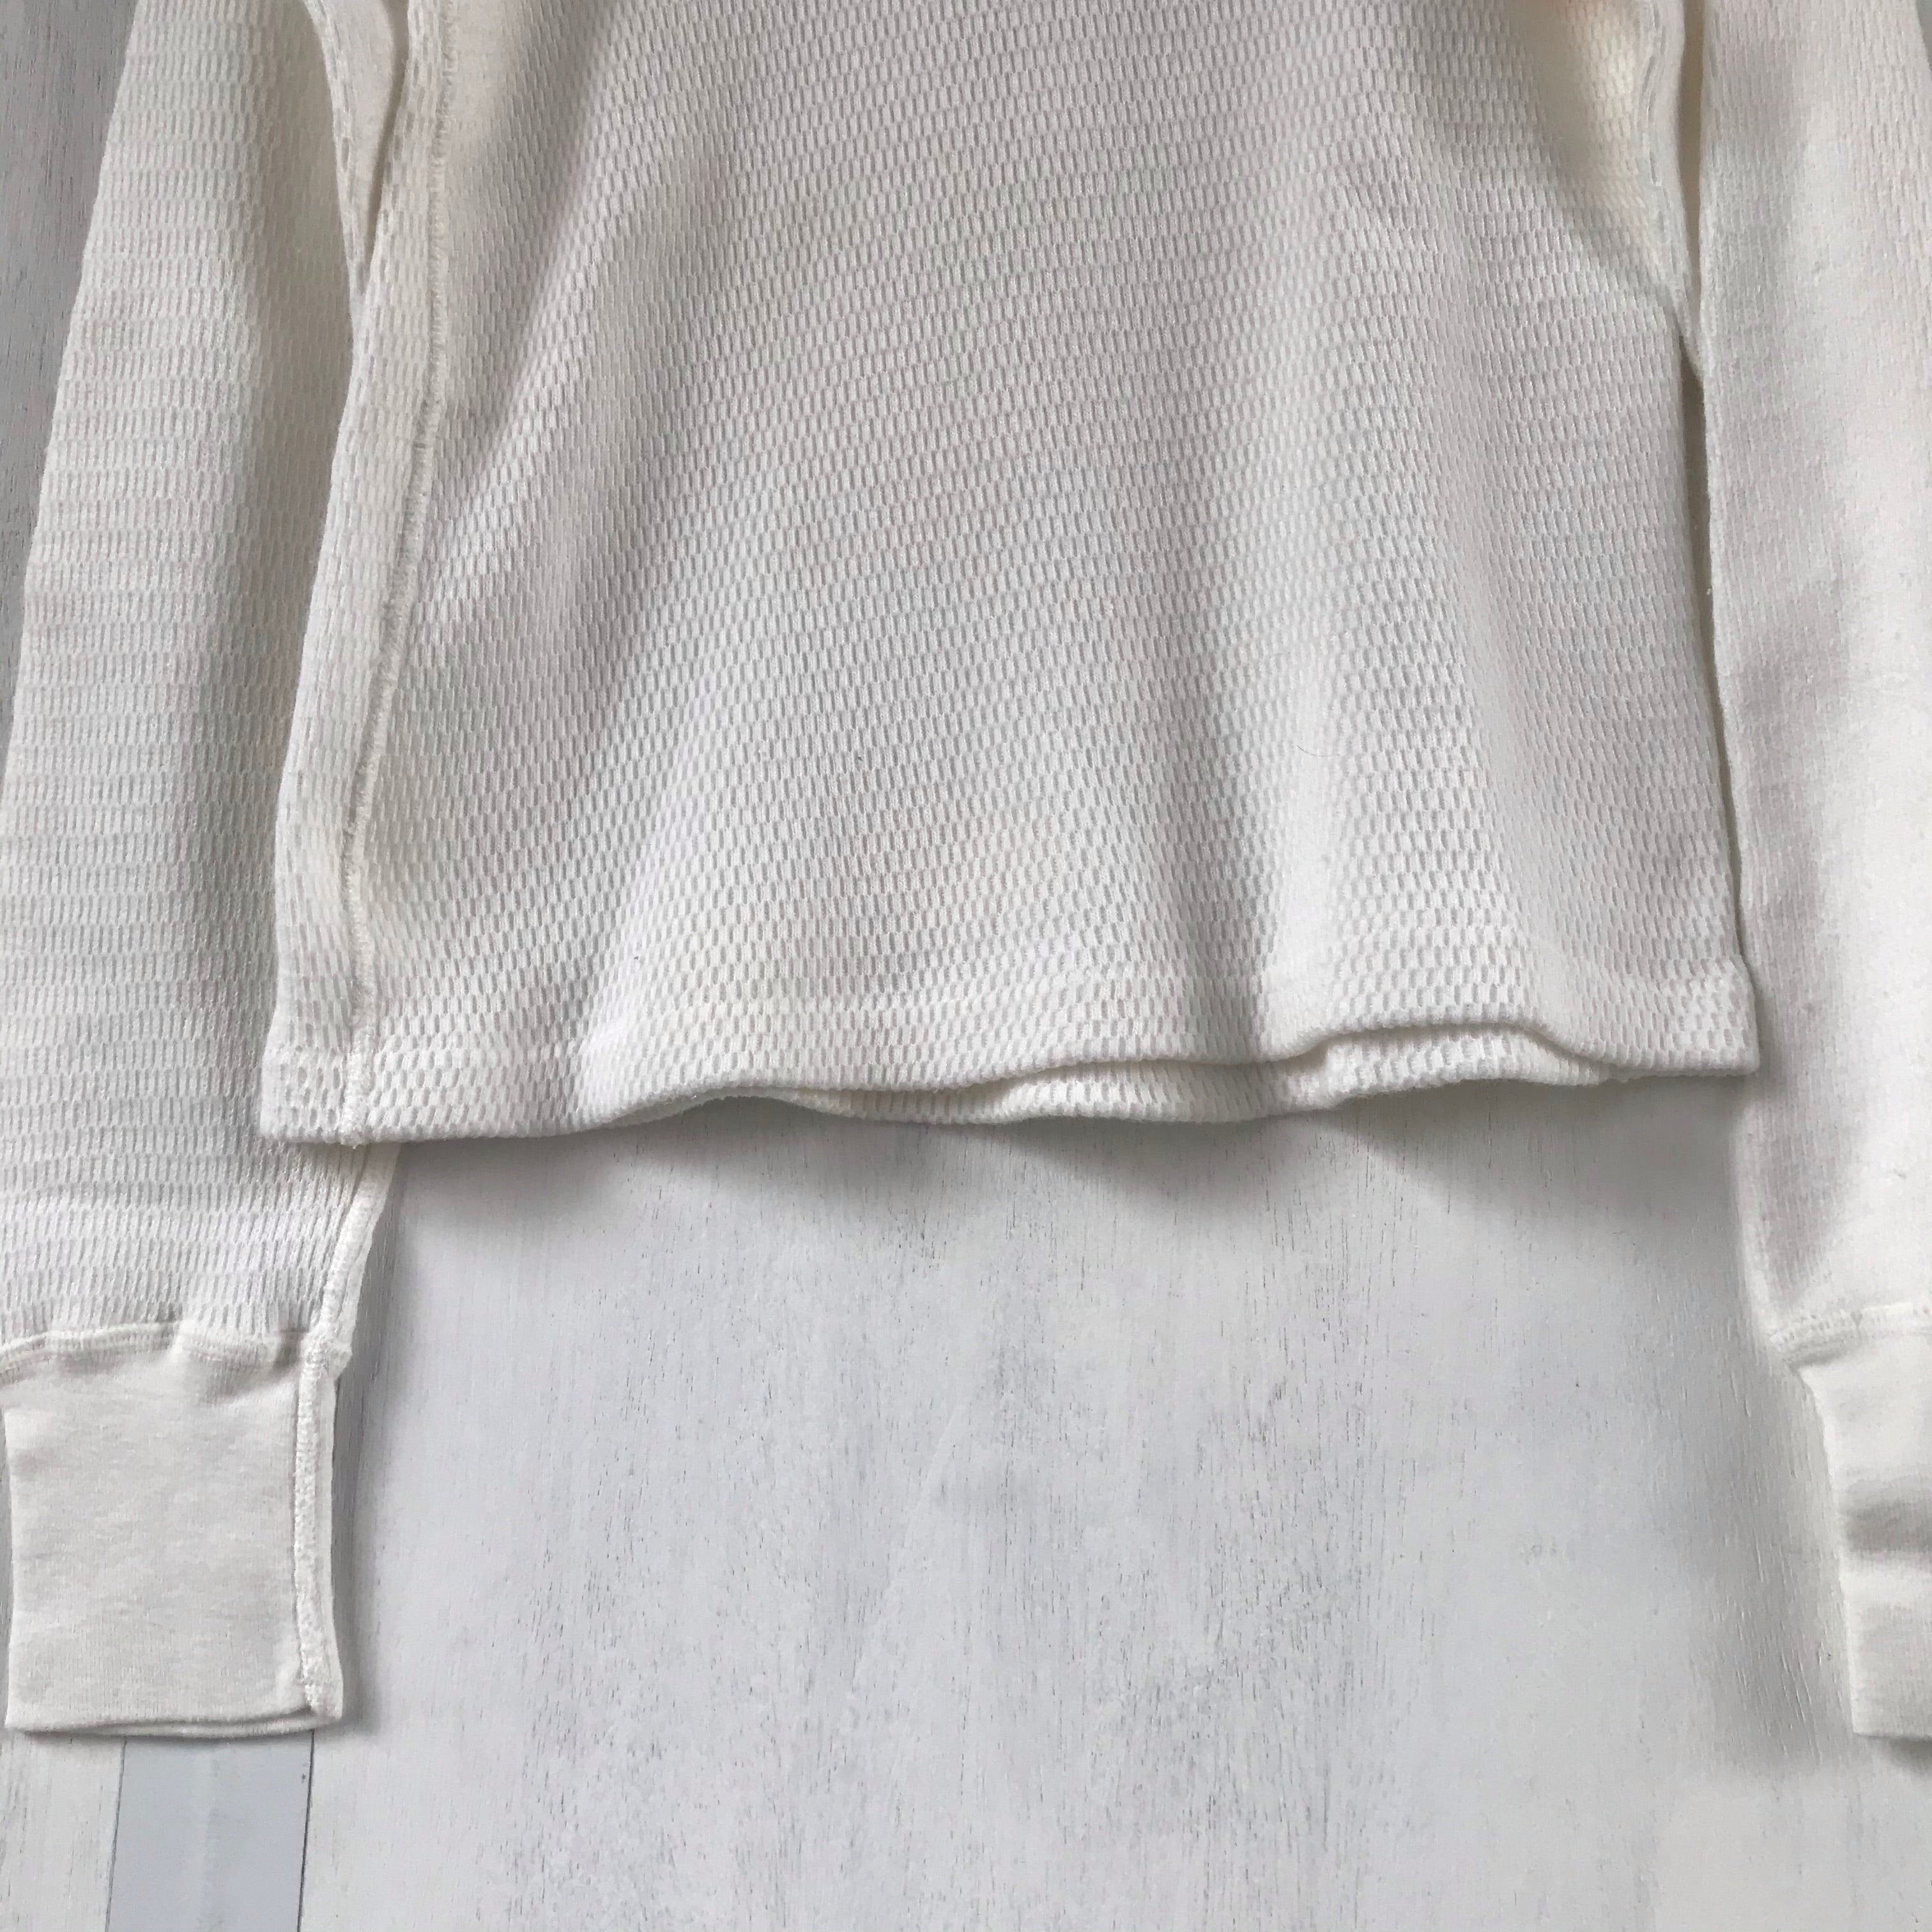 [ ONLY ONE ! ] U.S. LONG SLEEVE THERMAL UNDERSHIRT  / Mr.Clean Select